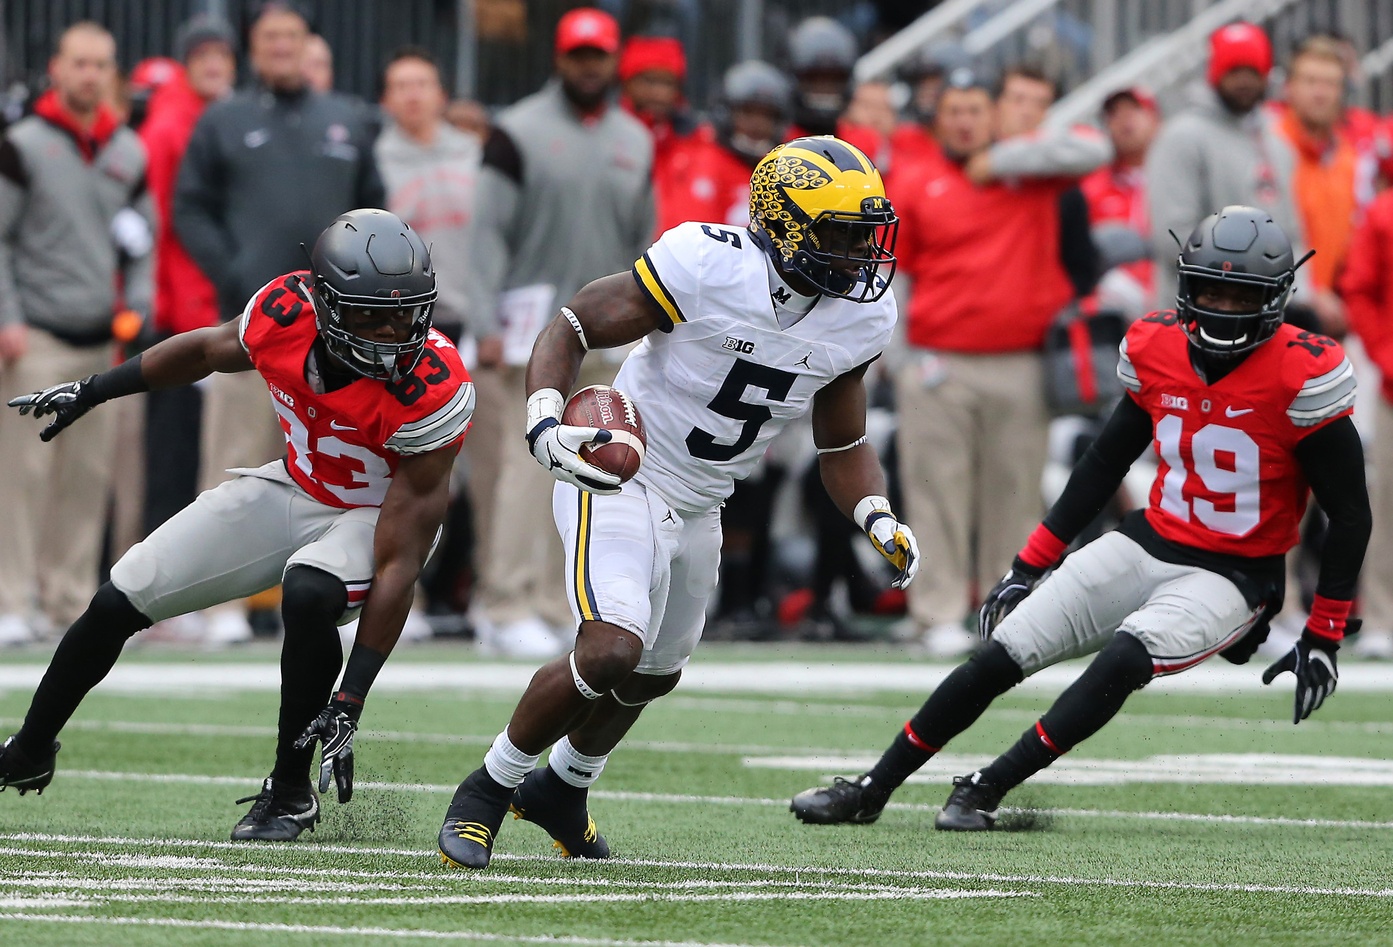 Nov 26, 2016; Columbus, OH, USA; Michigan Wolverines linebacker Jabrill Peppers (5) runs as Ohio State Buckeyes defenders Terry McLaurin (83) and Eric Glover-Williams (19) pursue during the second quarter at Ohio Stadium. Michigan Wolverines lead at half 10-7. Mandatory Credit: Joe Maiorana-USA TODAY Sports